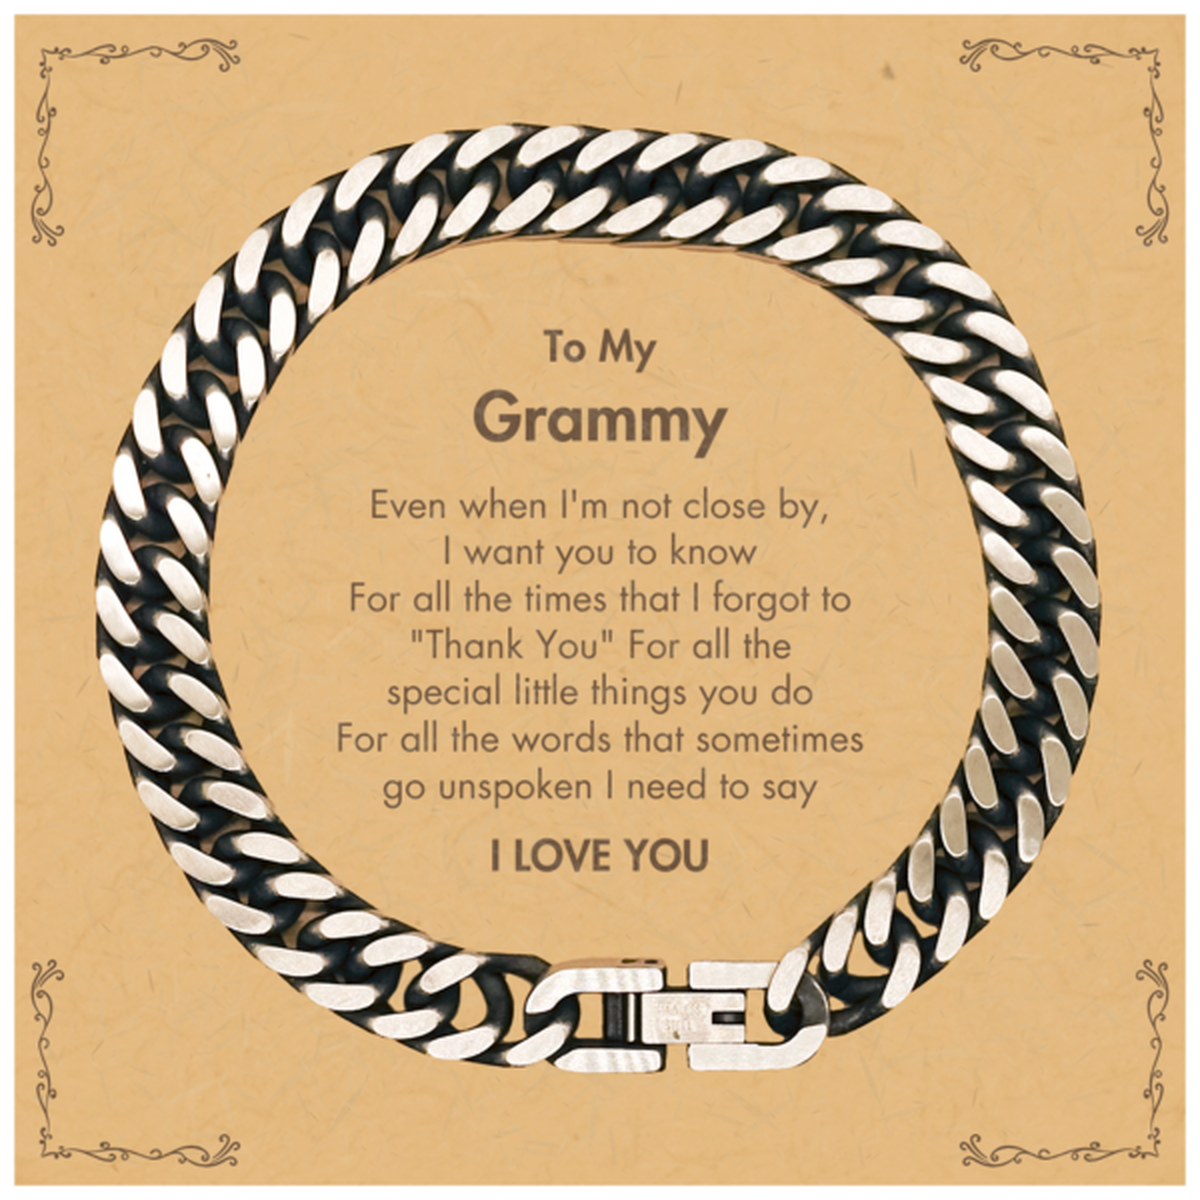 Thank You Gifts for Grammy, Keepsake Cuban Link Chain Bracelet Gifts for Grammy Birthday Mother's day Father's Day Grammy For all the words That sometimes go unspoken I need to say I LOVE YOU